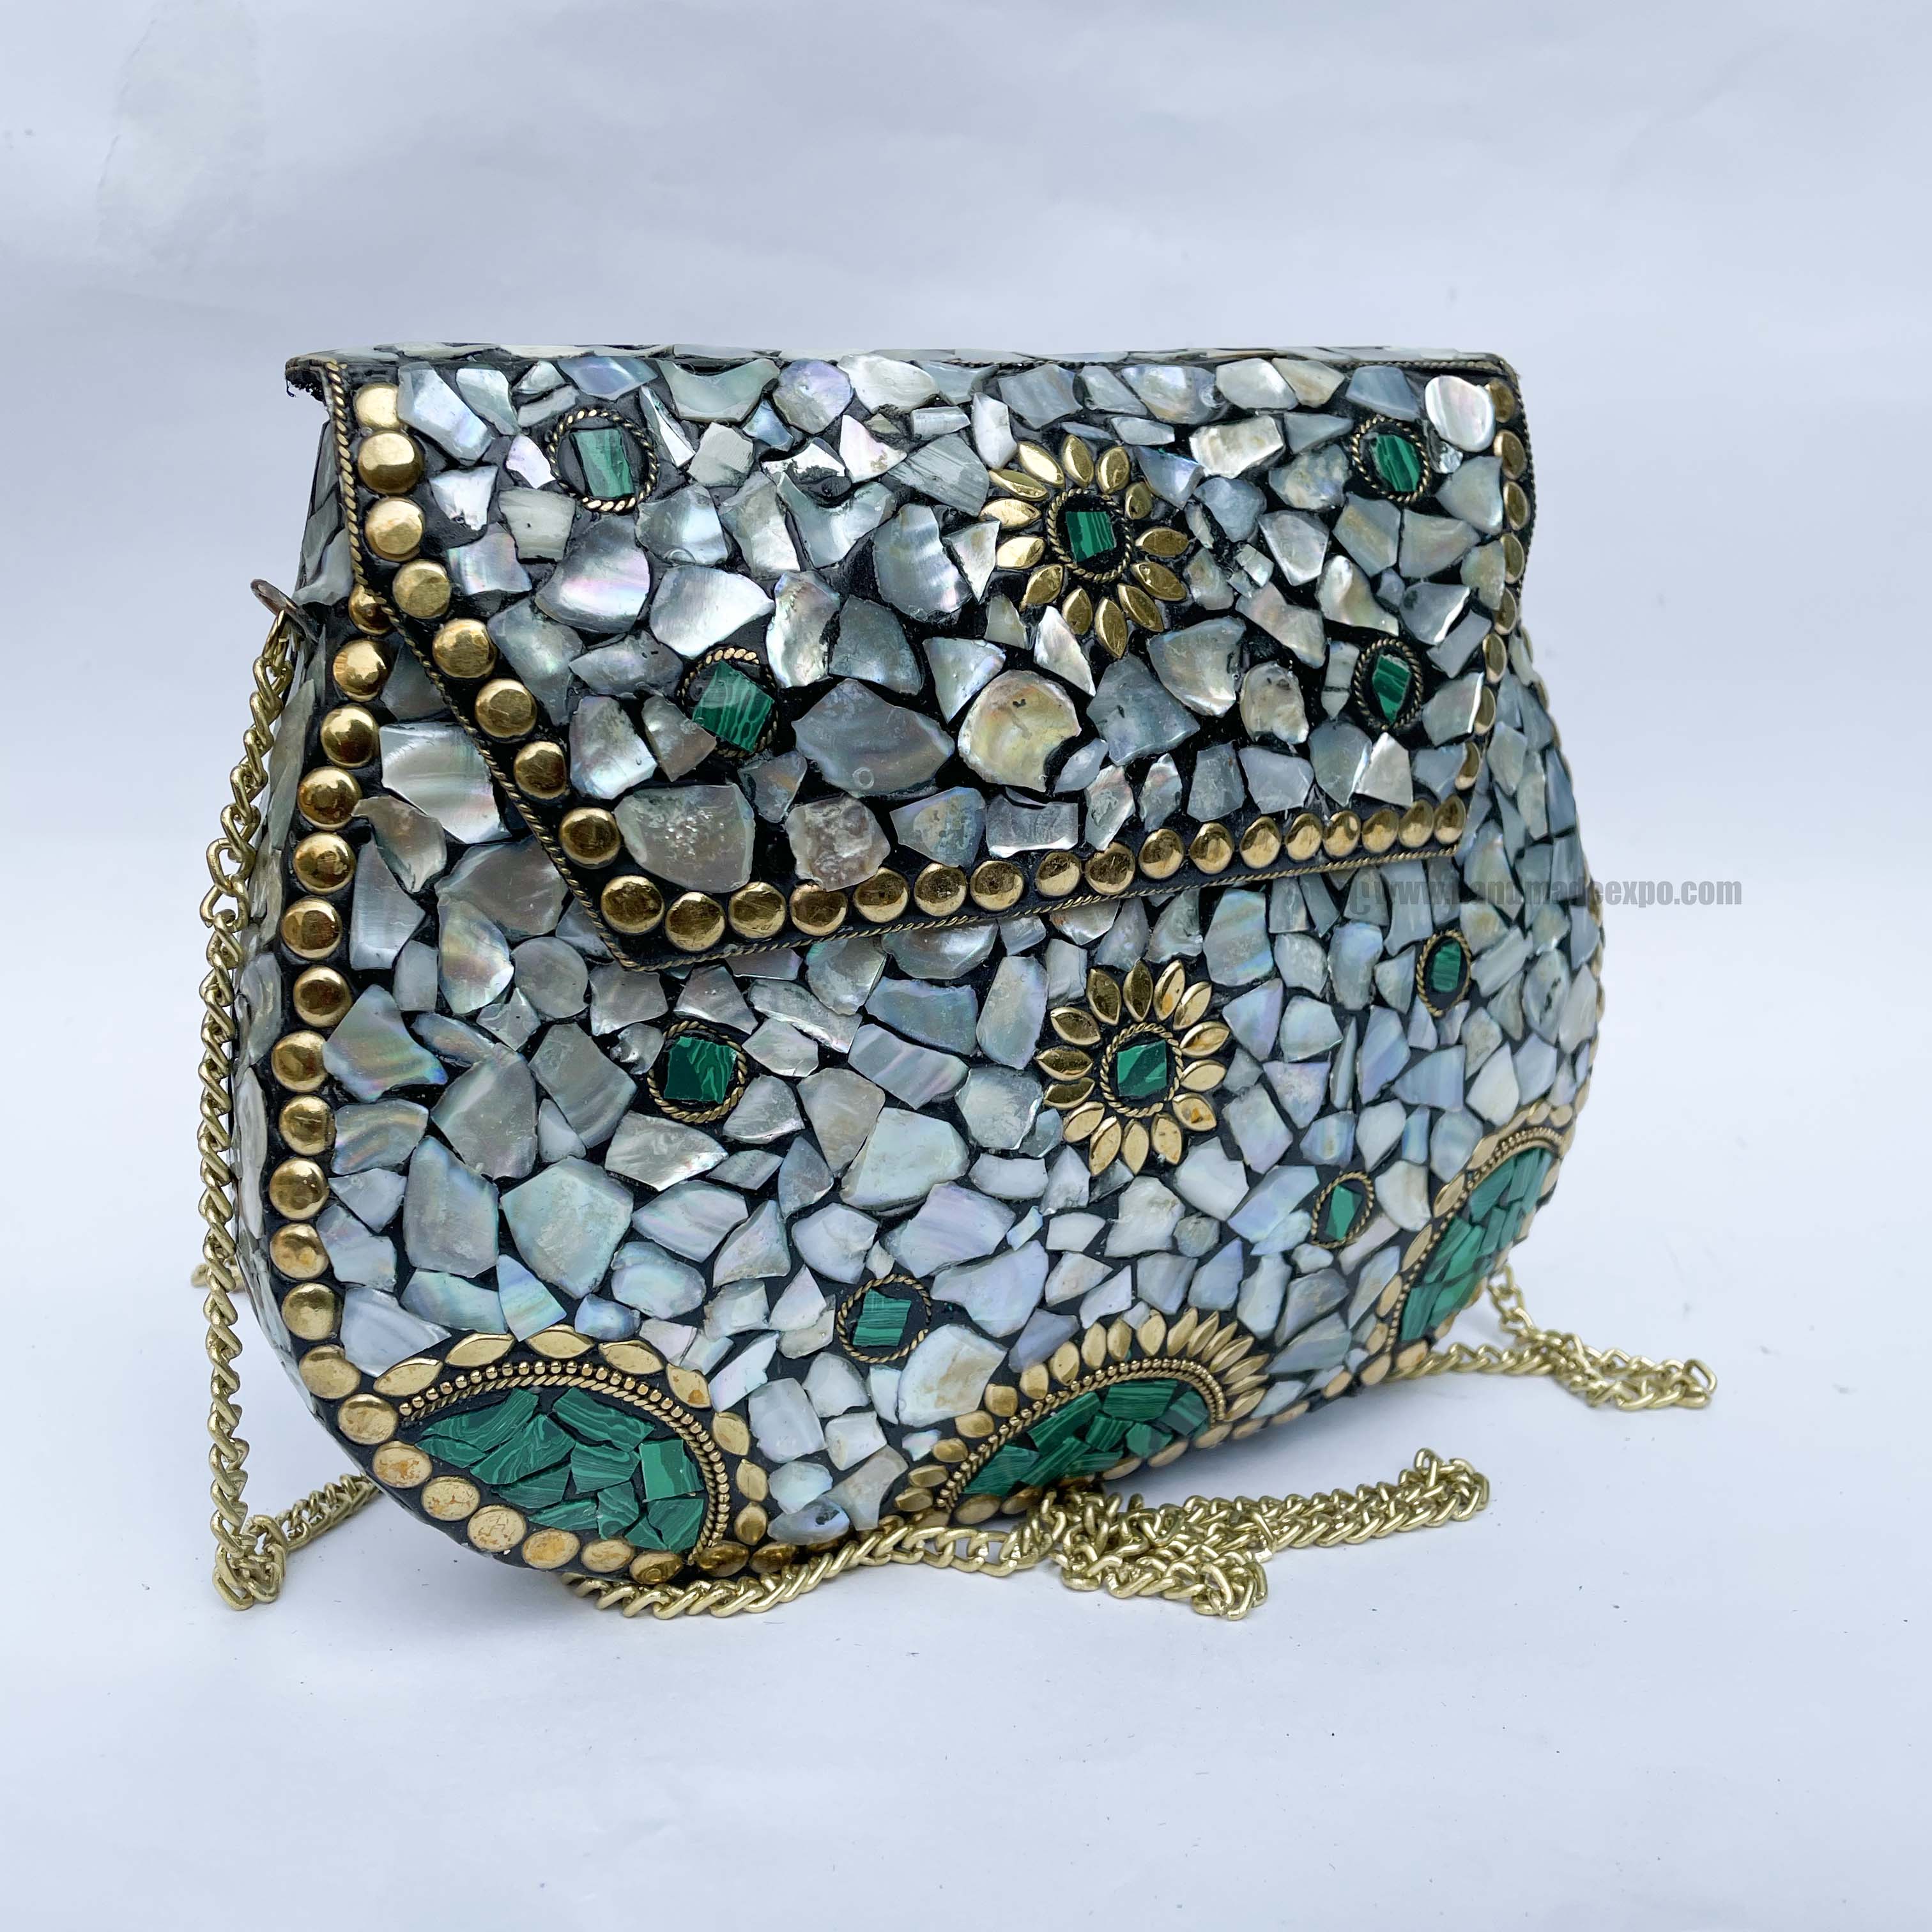 Nepali Handmade Big Ladies Bag With stone Setting, metal, green And Silver Color